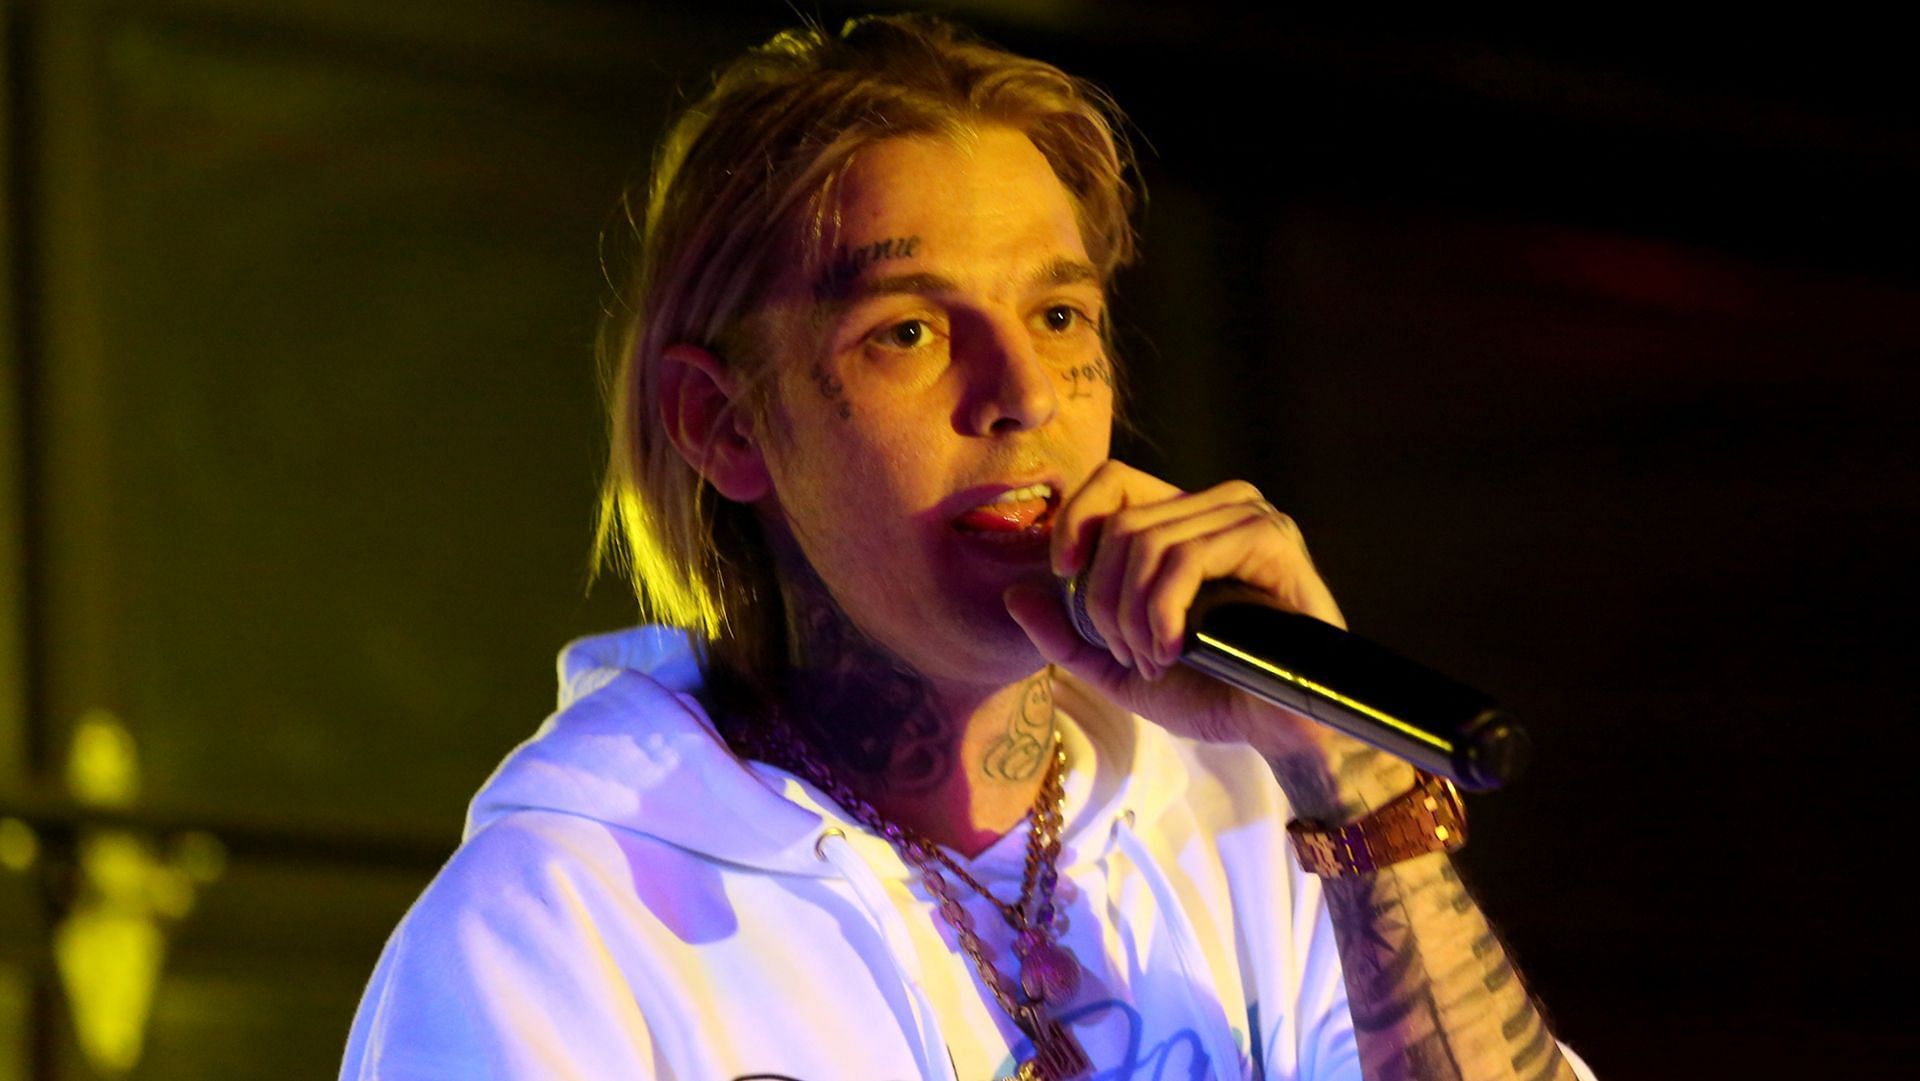 Aaron Carter shared a 11-month-old son, Prince, with on-and-off fiance, Melanie Martin. (Image via Gabe Ginsberg/Getty Images)